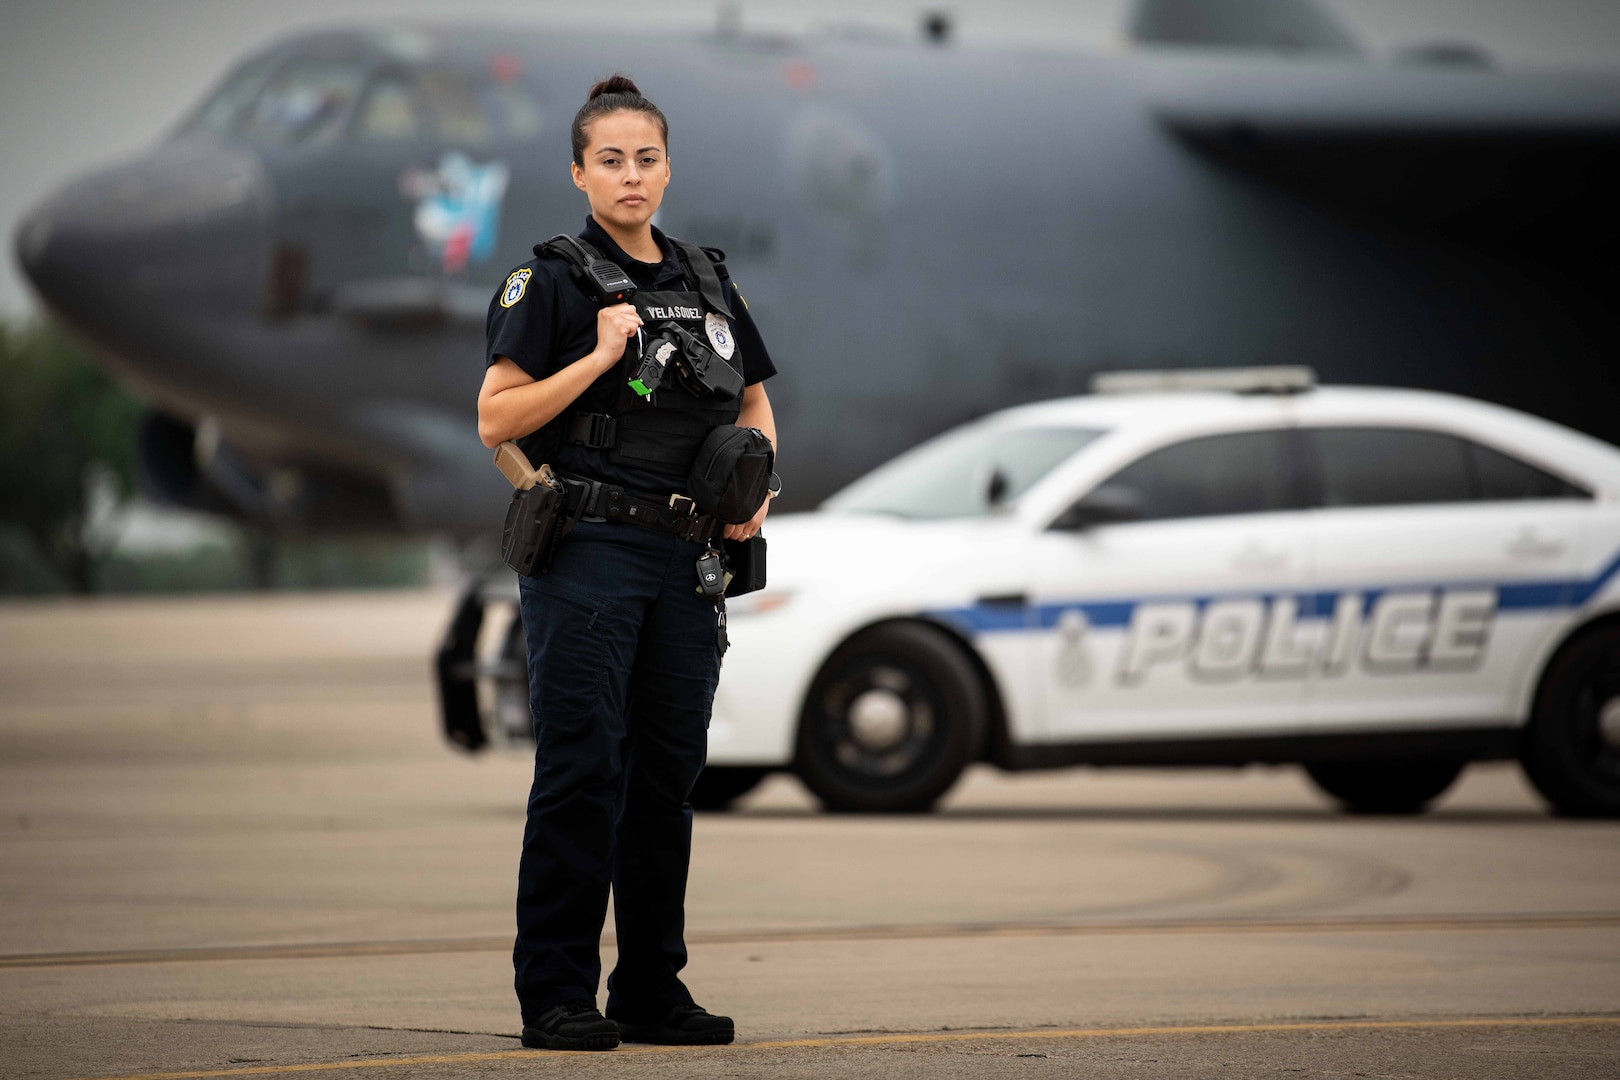 female law enforcement officer stands in front of a vehicle and a plane